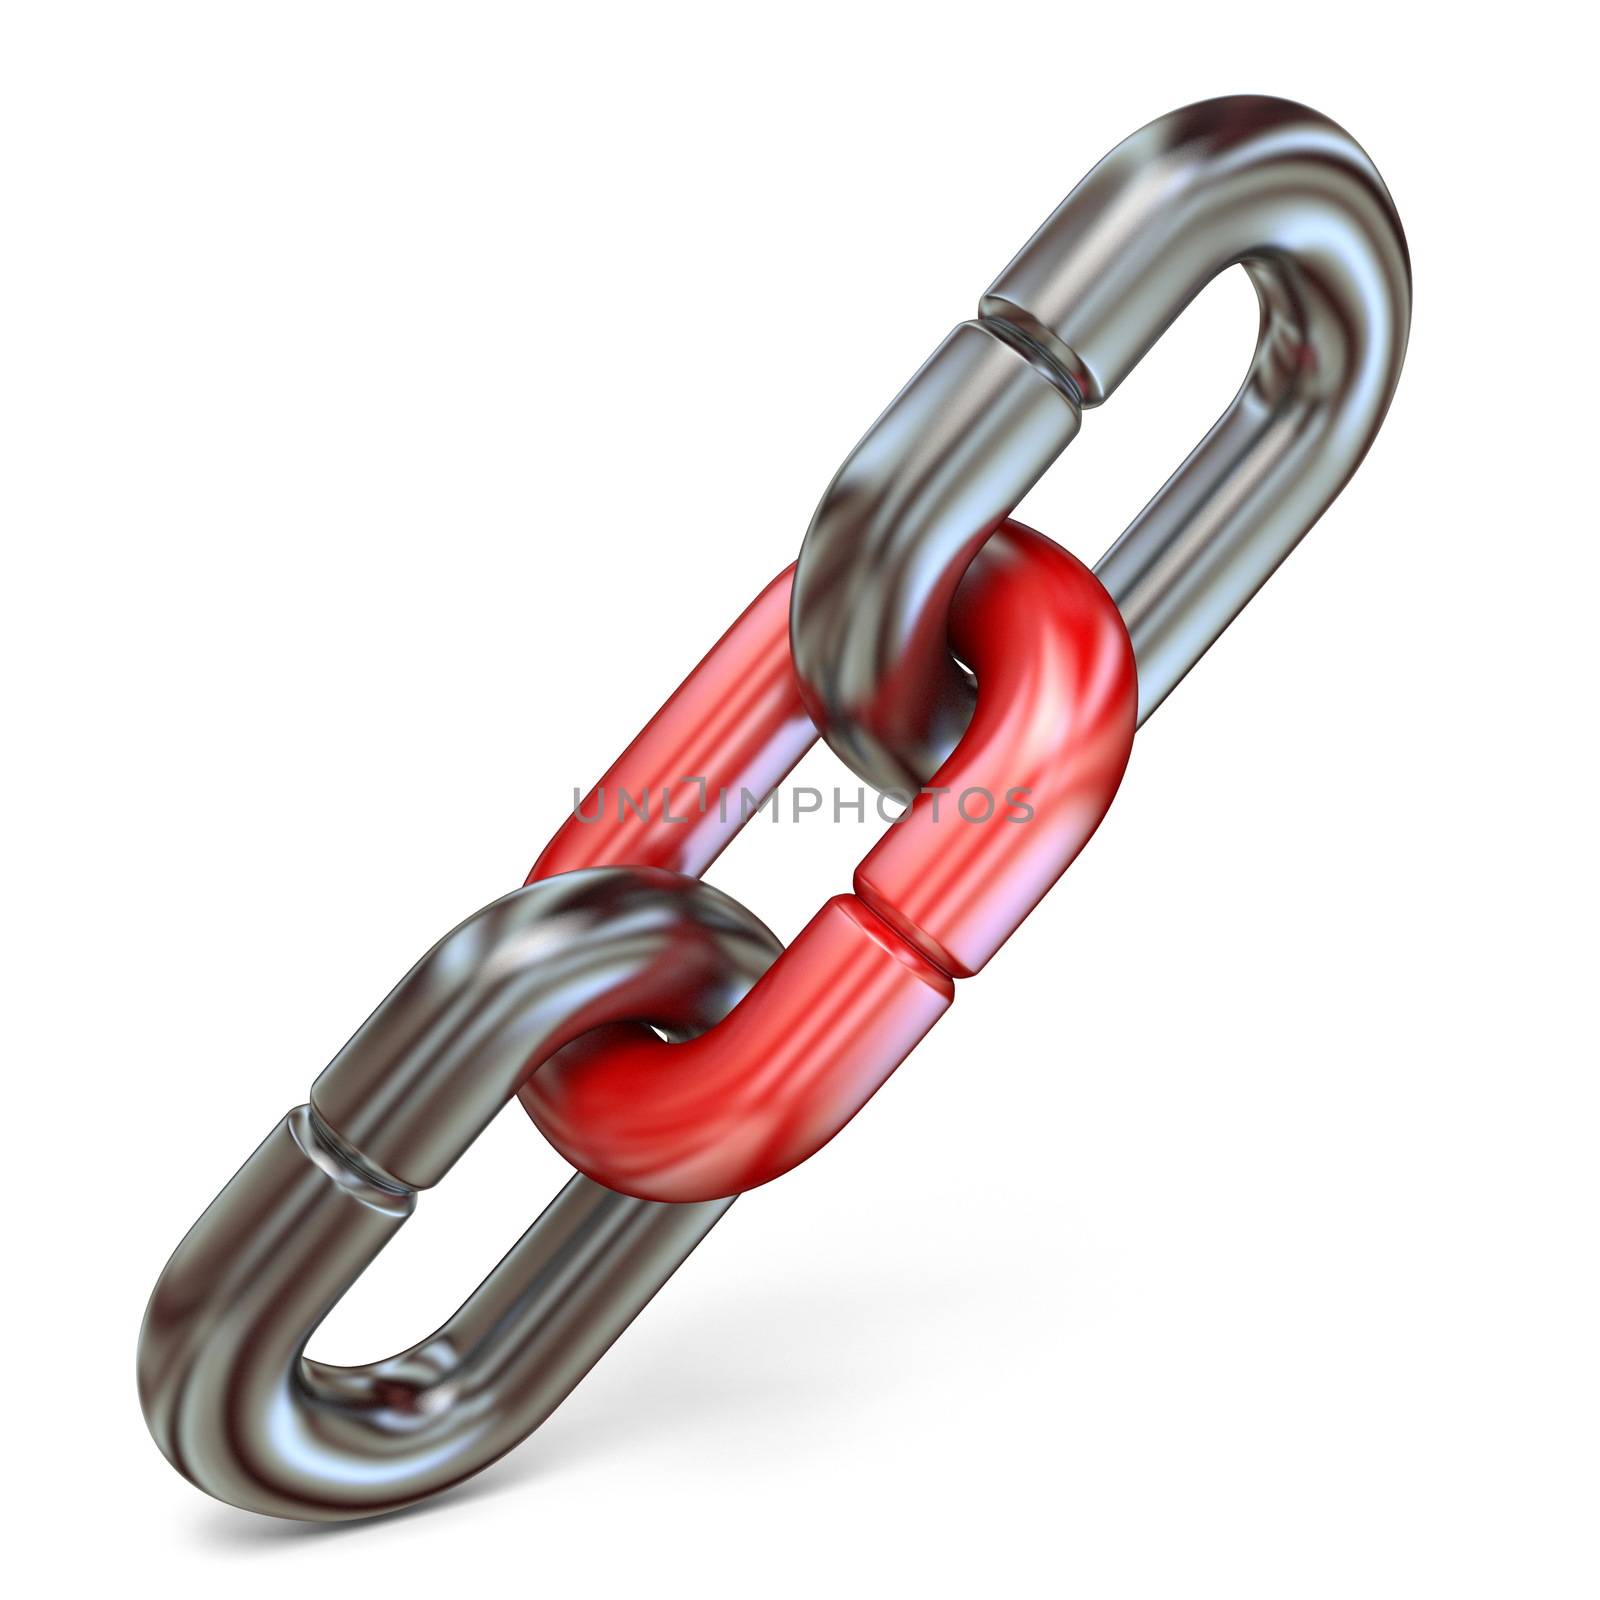 Red chain link connect two metal chain links 3D rendering illustration isolated on white background